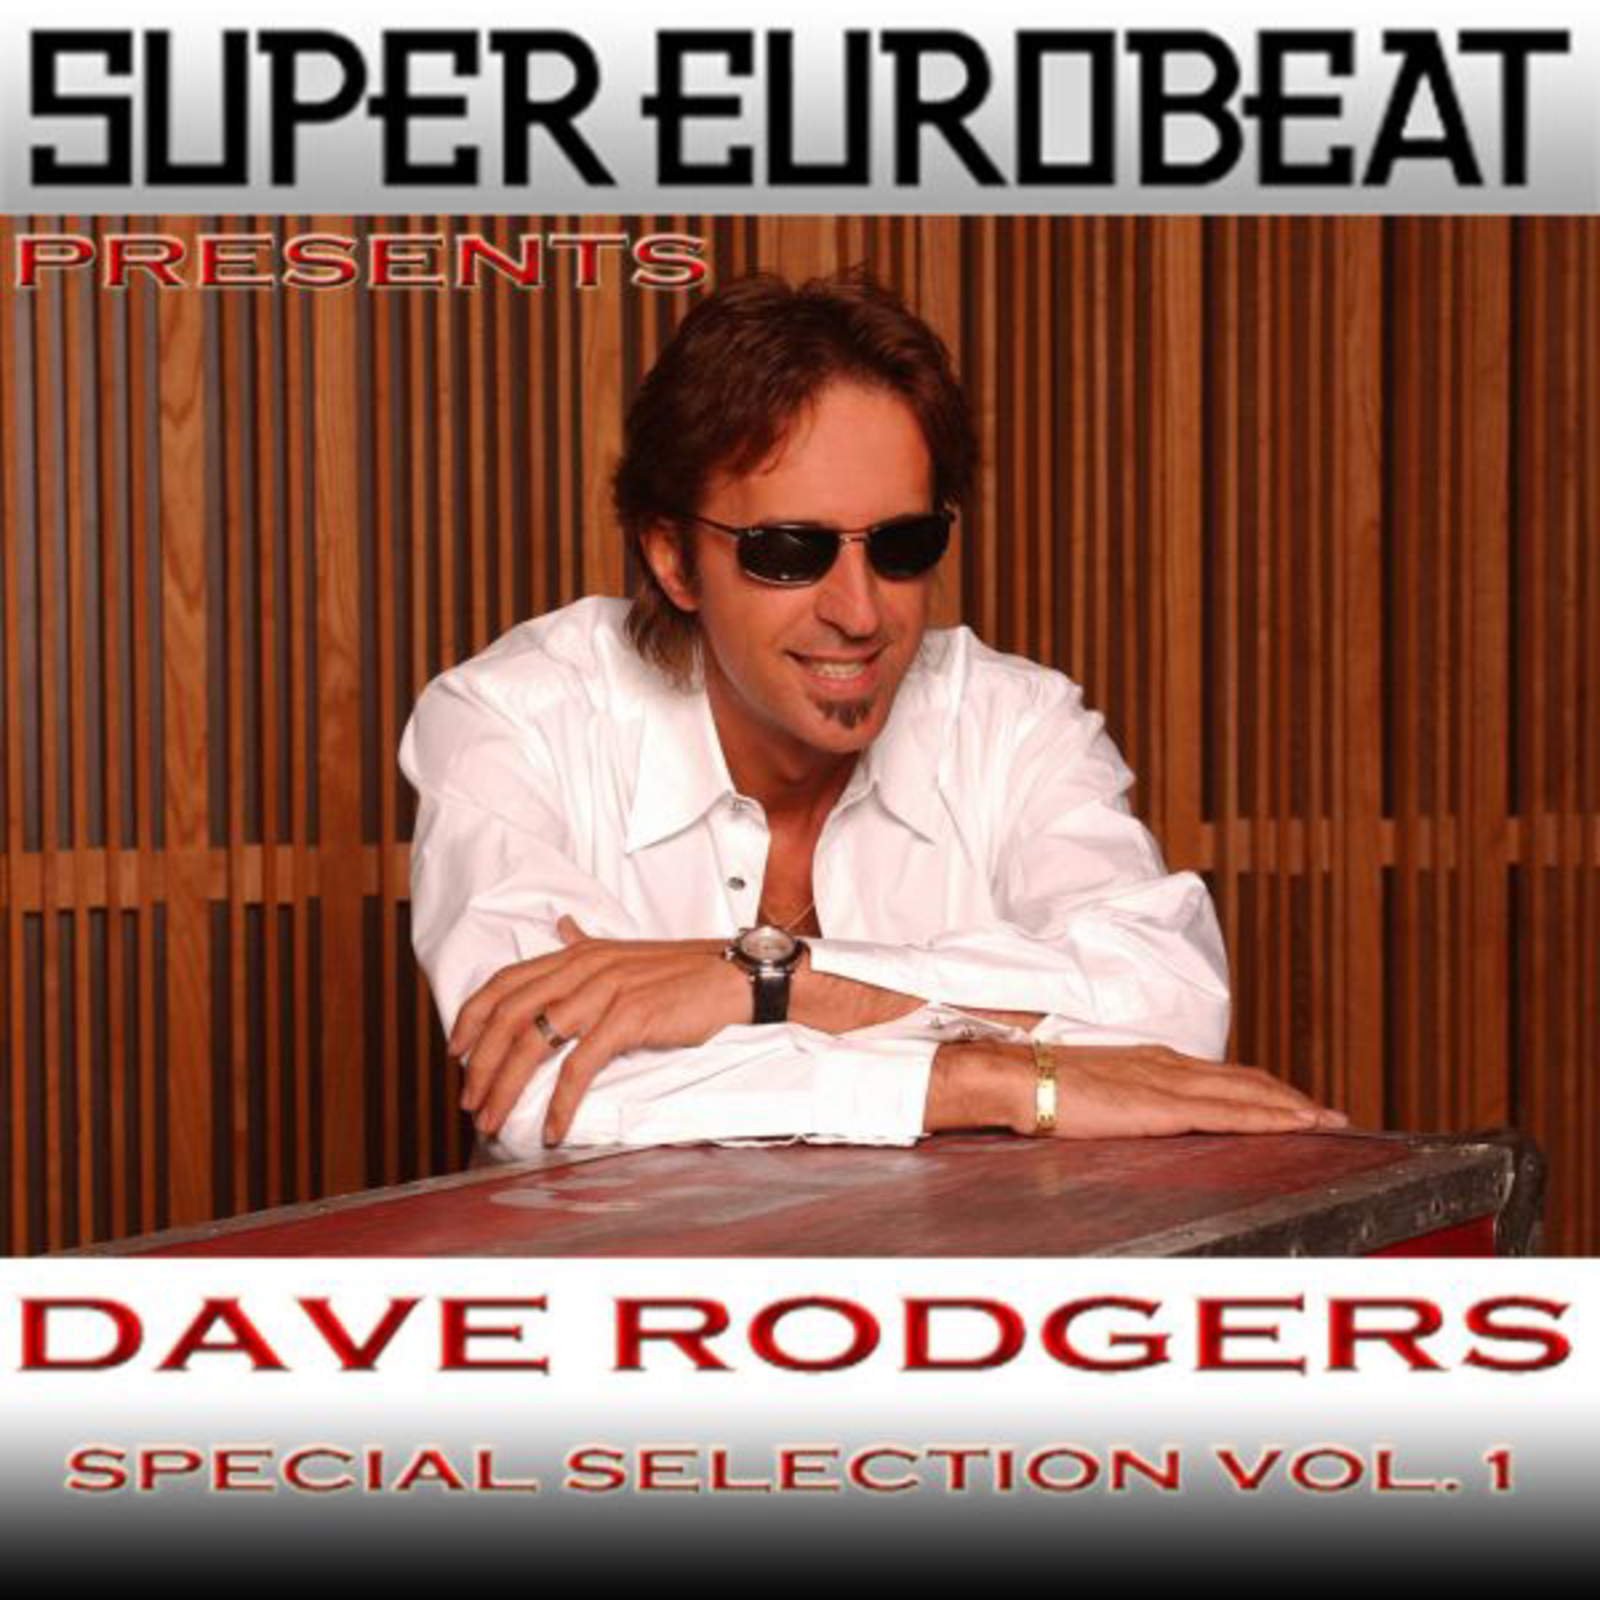 Super Eurobeat Presents Dave Rodgers Special Collection Vol 1